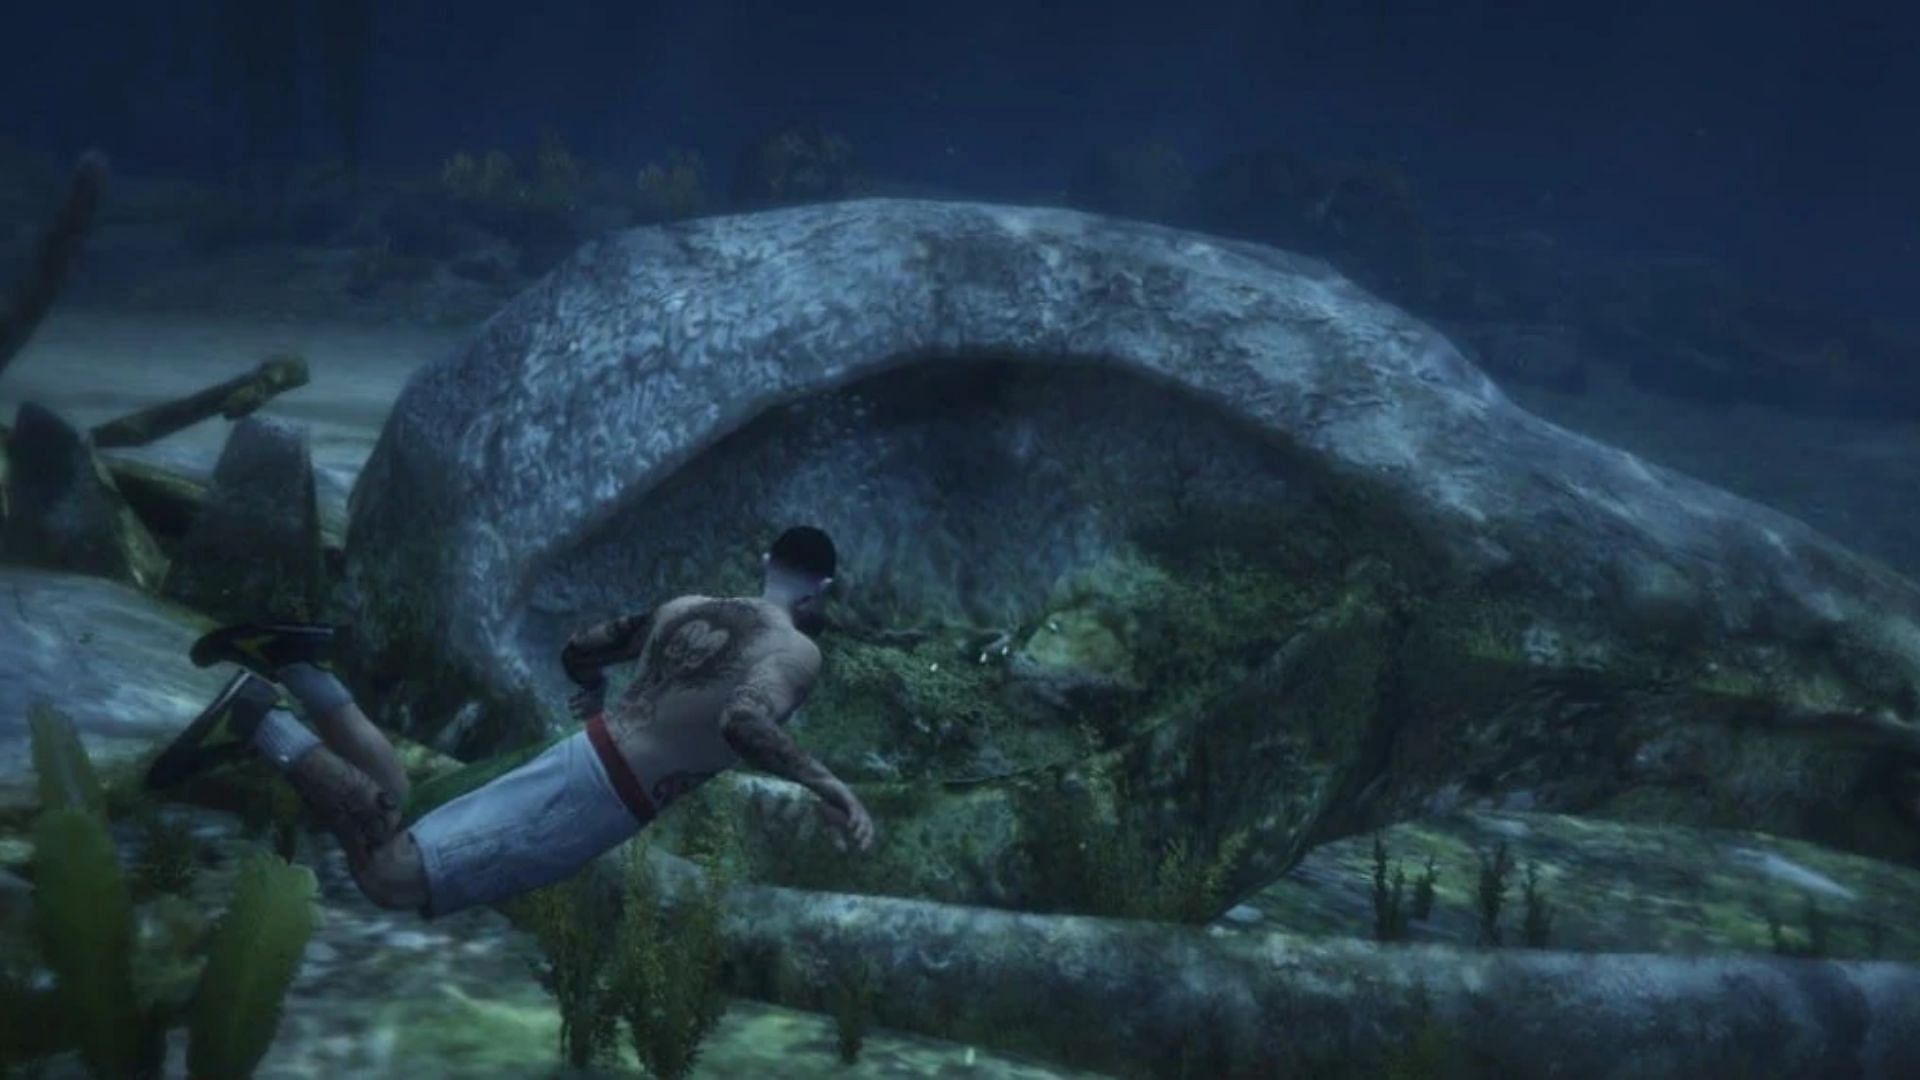 Giant whale skeletons are one of the creepy secrets in GTA 5 (Image via Rockstar Games || GTA Myths Wiki)